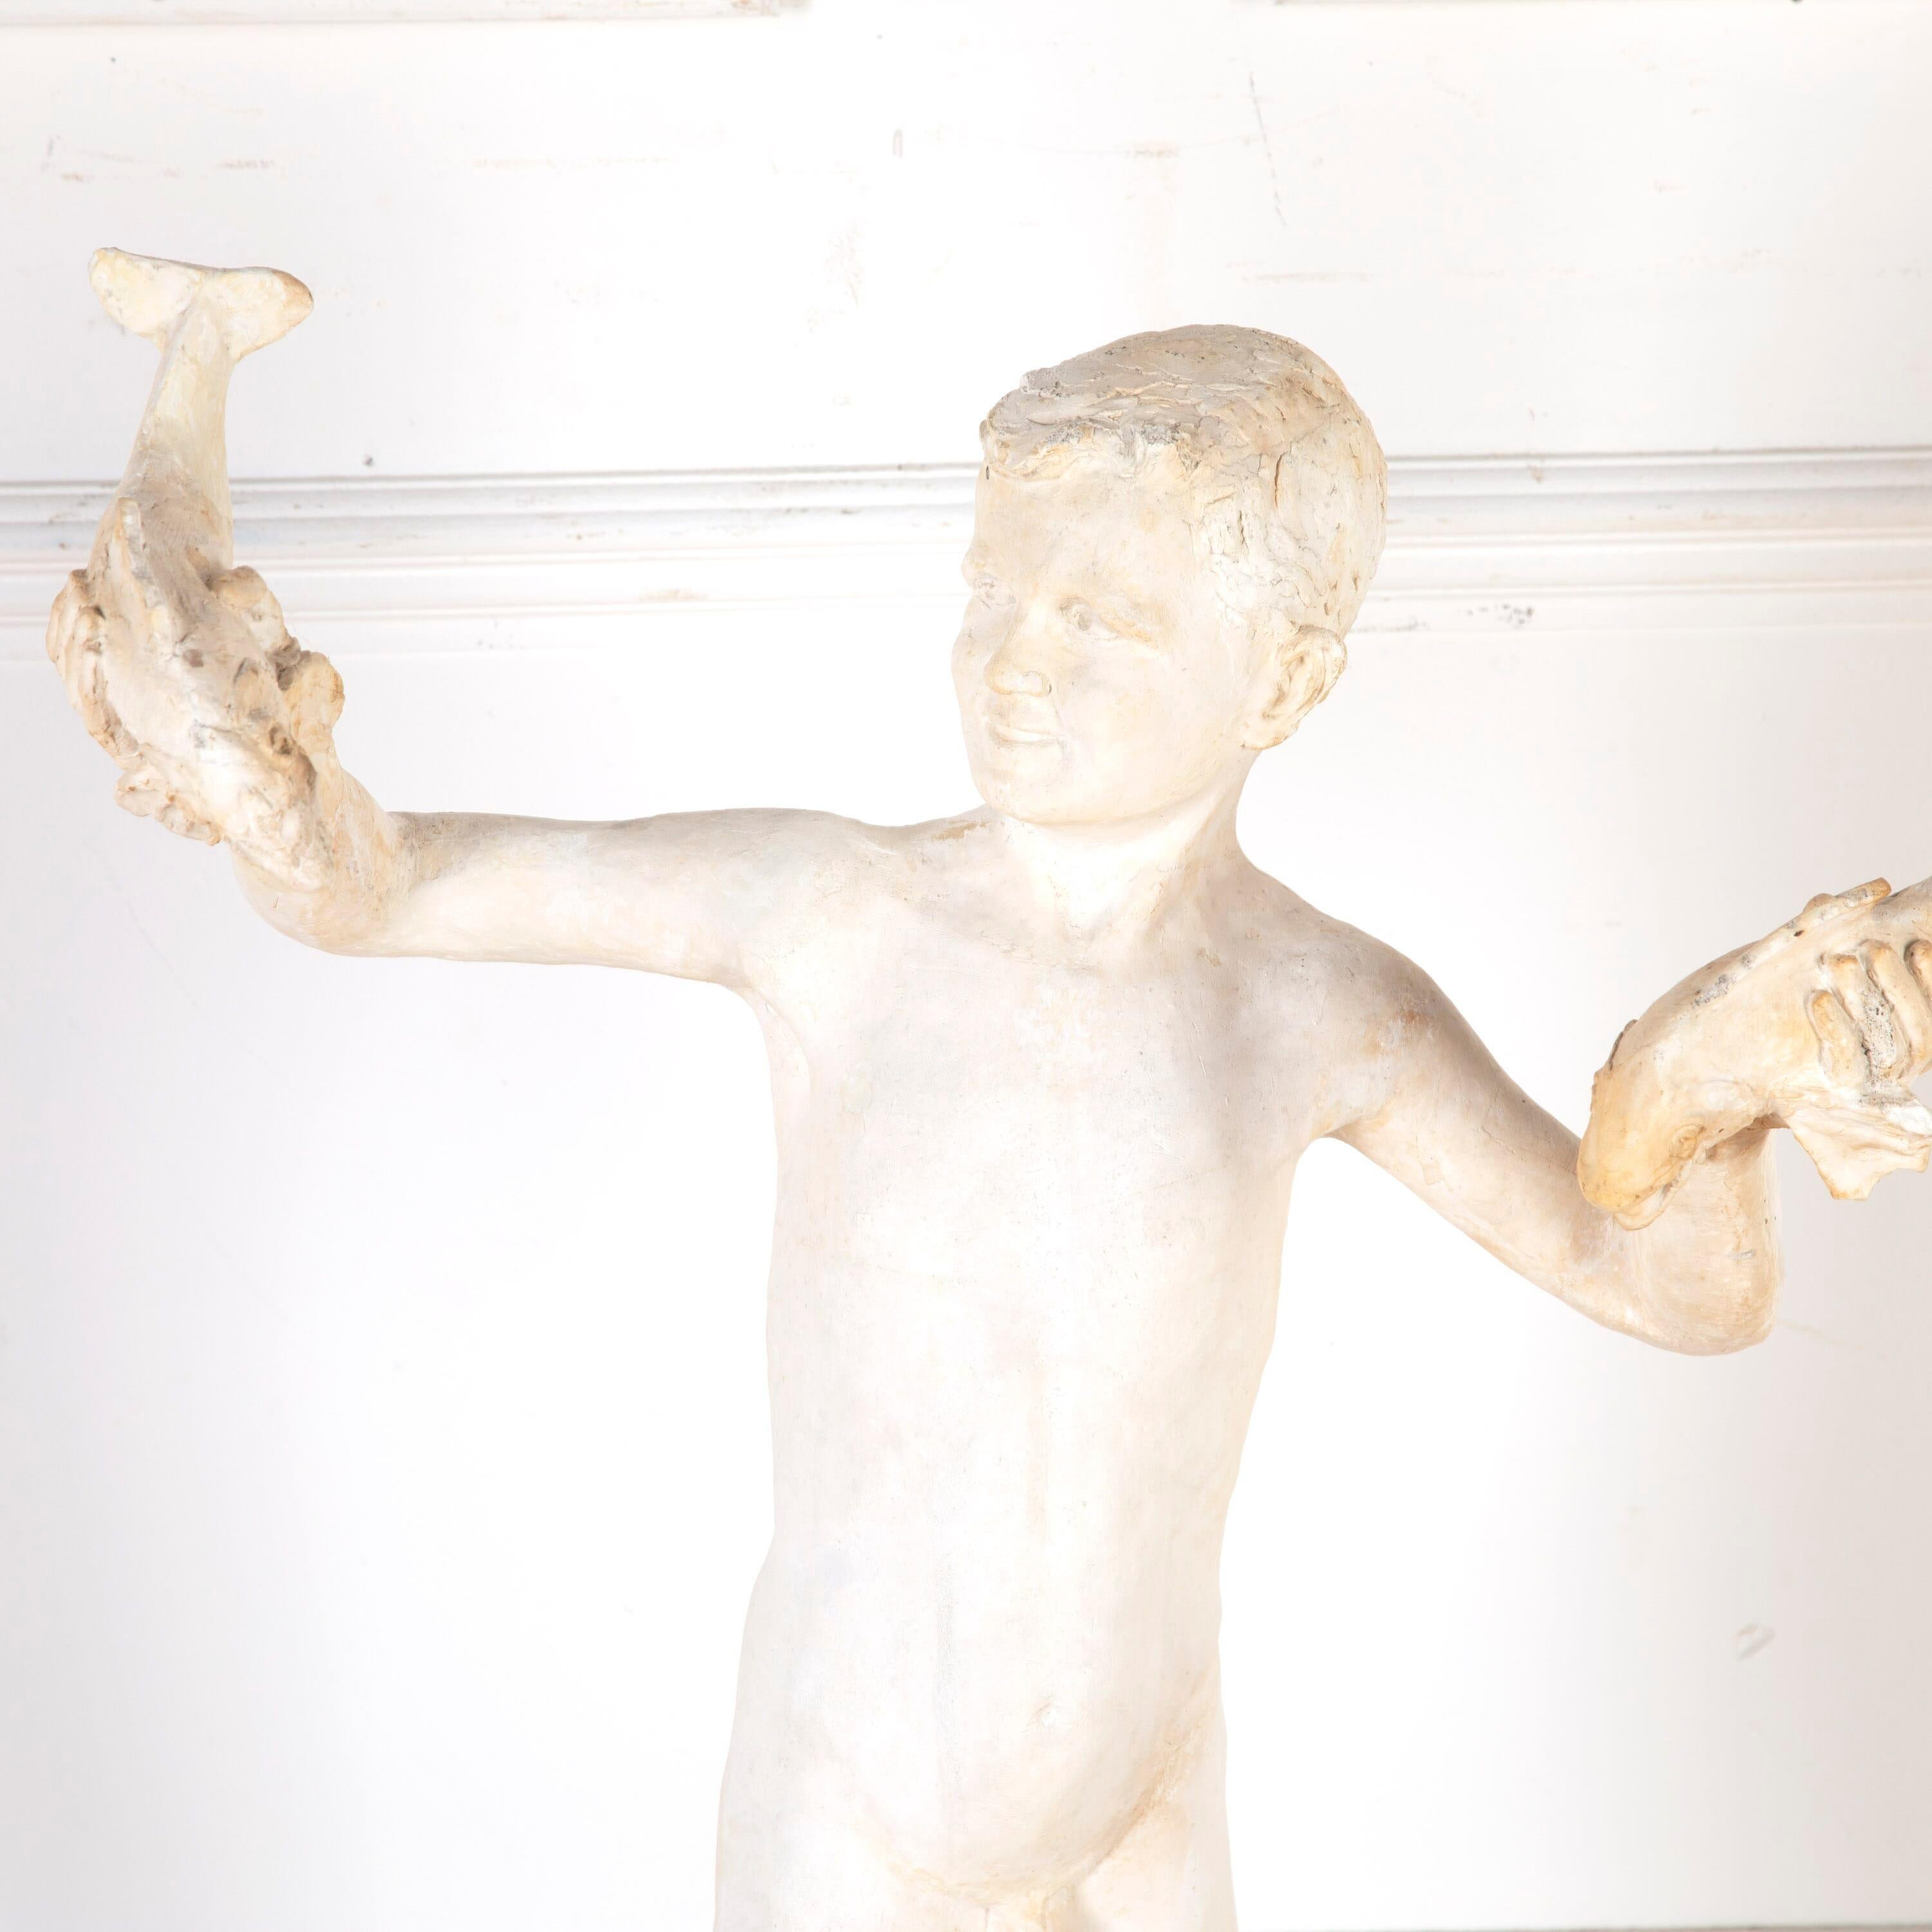 Plaster sculpture of a naked young boy holding fishes aloft. 

This charming sculpture is believed to be a maquette of John Hodges' fountain sculpture in Braintree, Essex. 

A maquette is a three-dimensional object made as a preparatory study